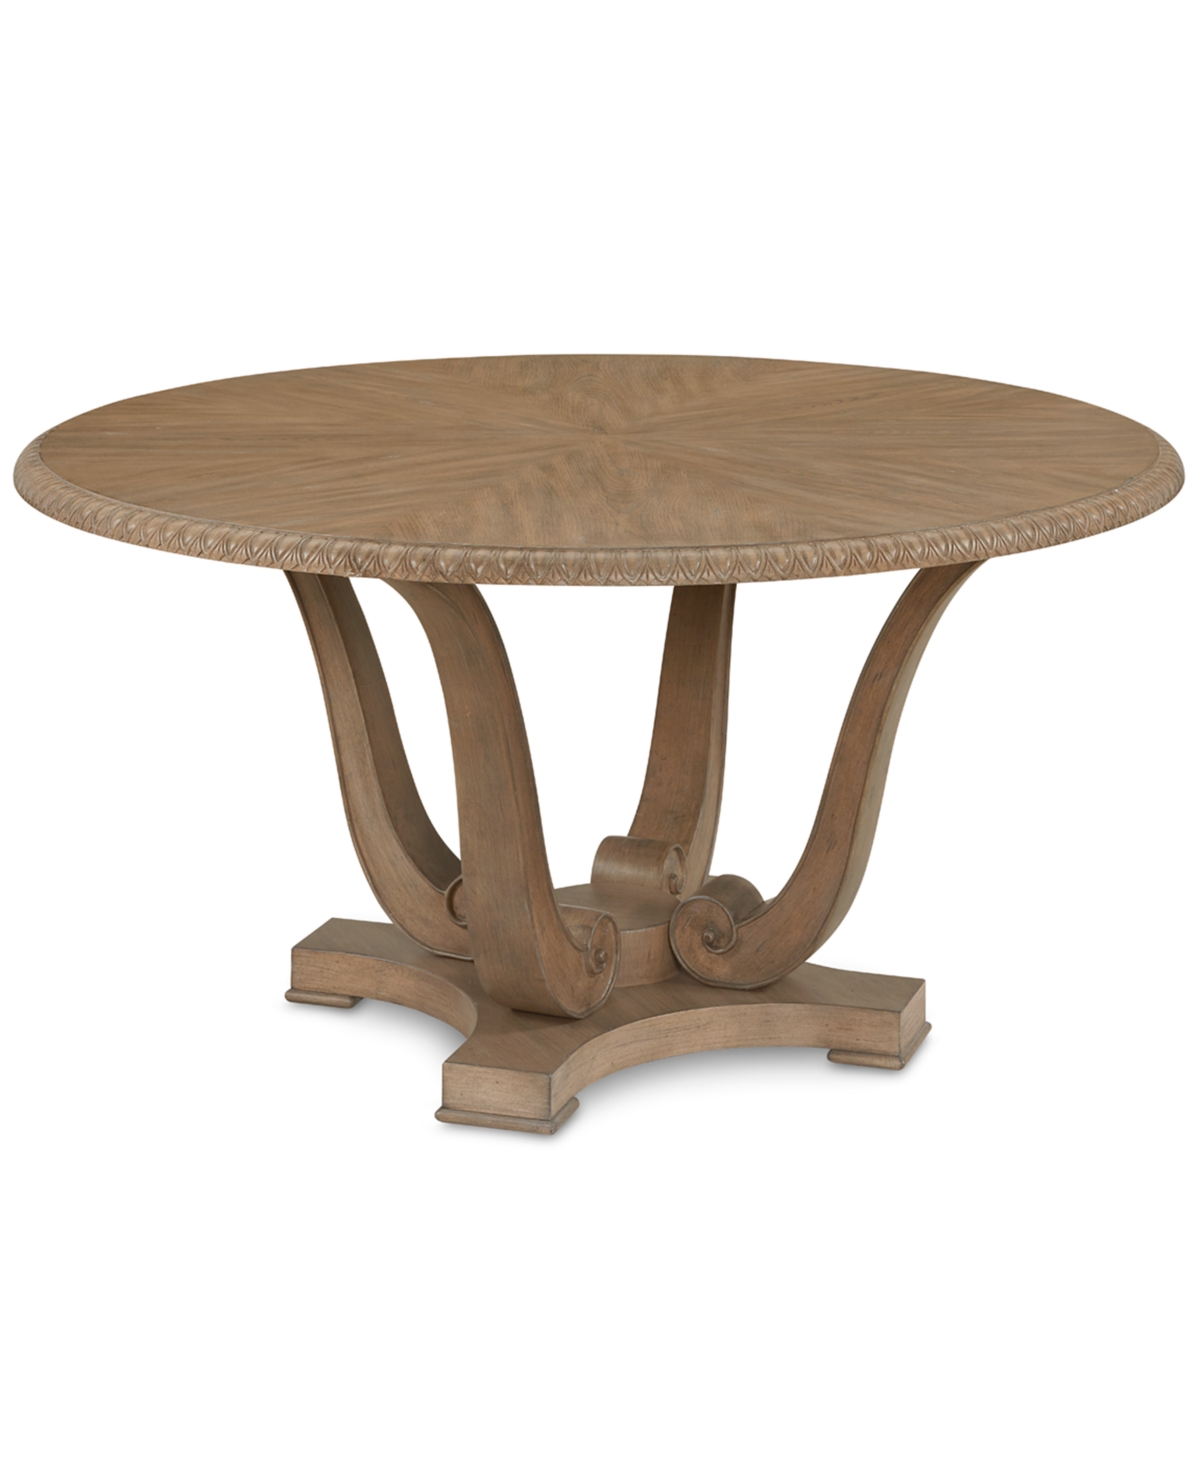 Jasper County Stately Brown Round Dining Table